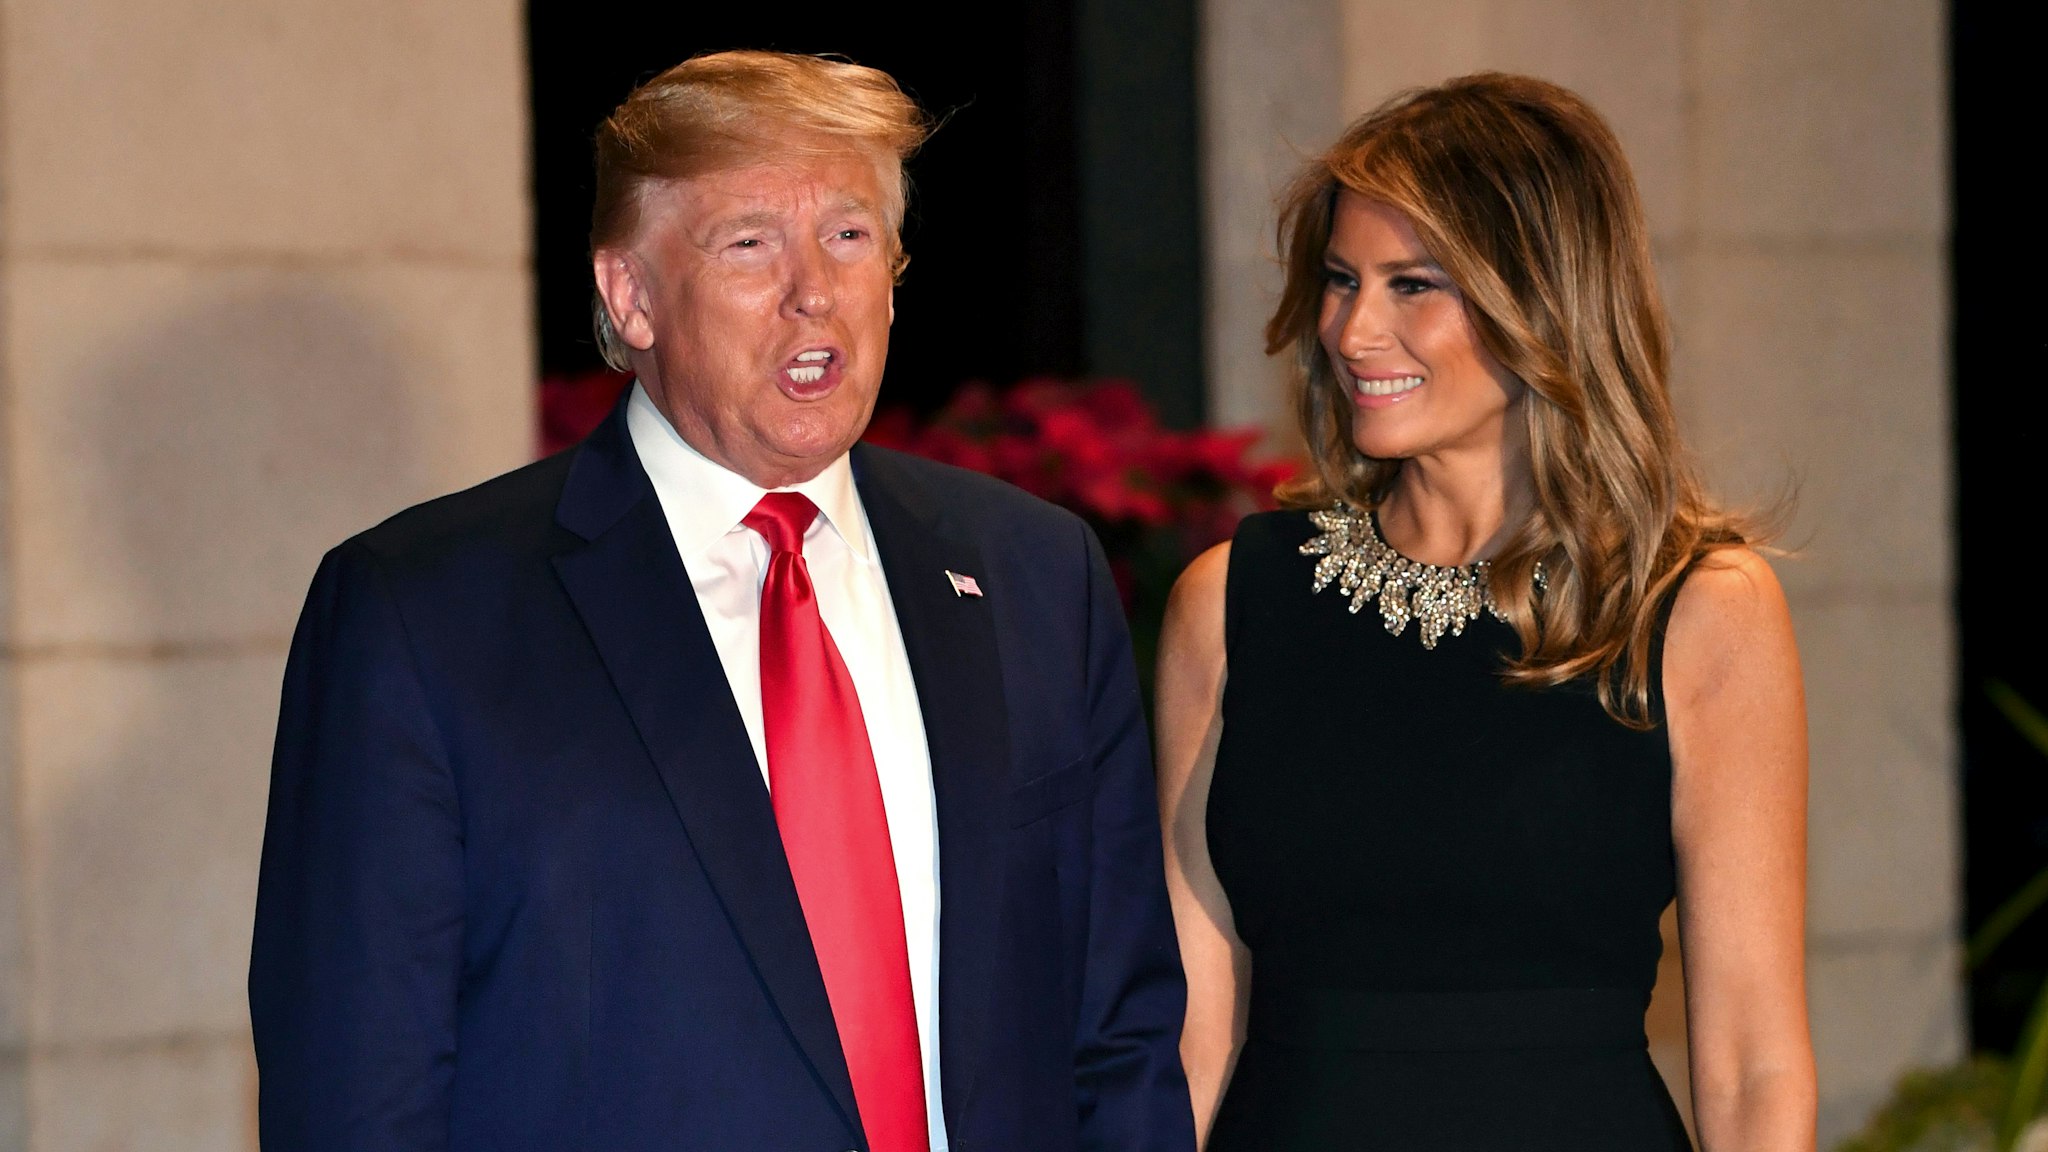 US President Donald Trump and First Lady Melania Trump arrive for a Christmas Eve dinner with his family at Mar-A-Lago in Palm Beach, Florida on December 24, 2019.